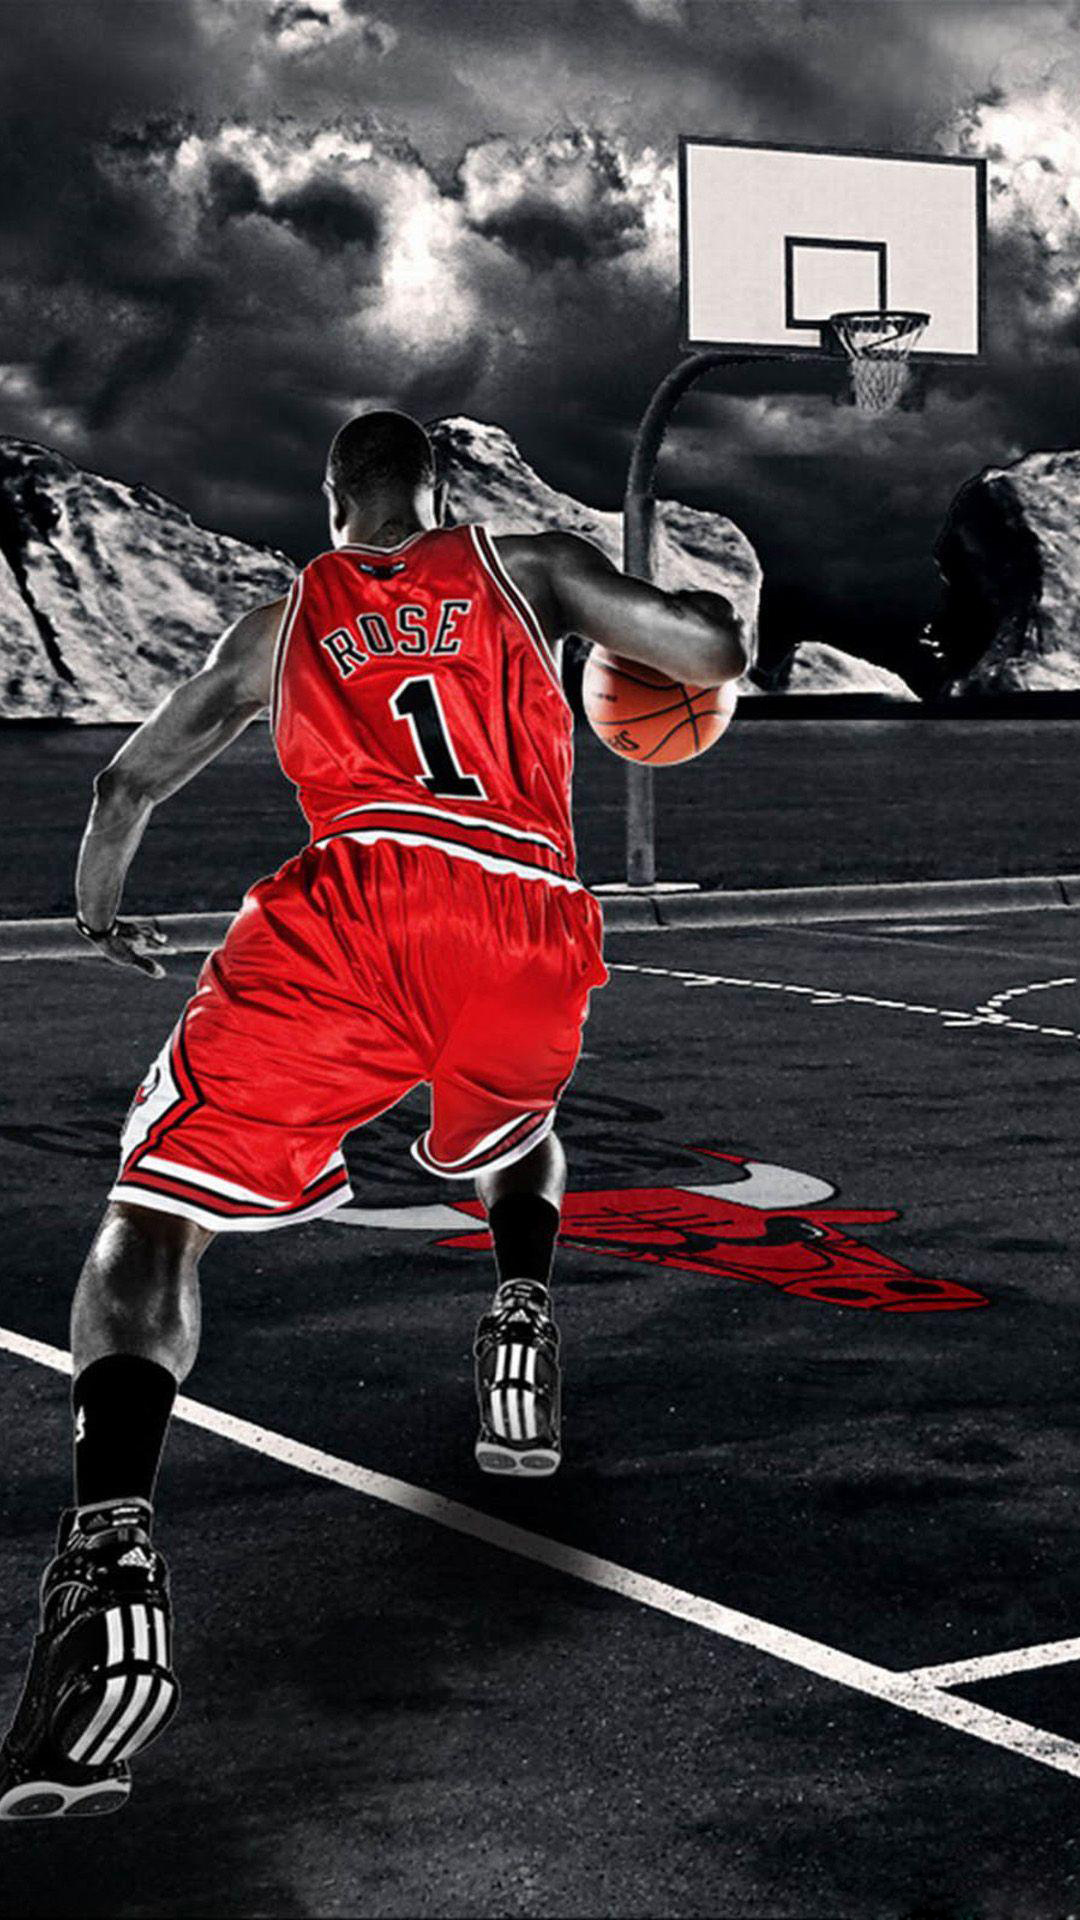 Cool Sports Wallpaper for iPhone